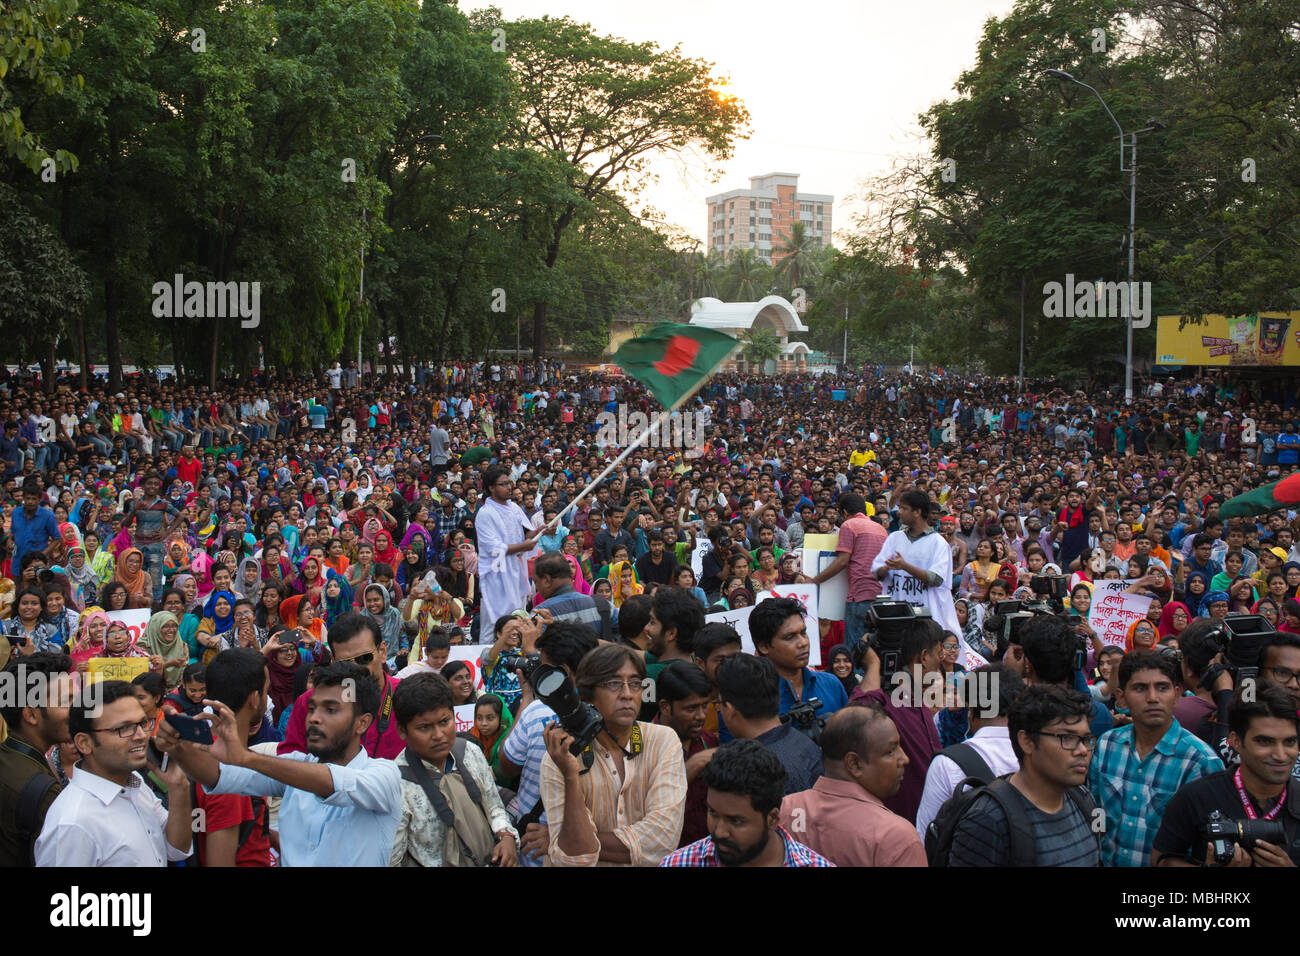 DHAKA, BANGLADESH - APRIL 11 : Bangladeshi students gather for a protest against quotas for certain groups of people in government jobs in Dhaka, Bangladesh on April 11, 2018.  Tens of thousands of university students marched in cities across Bangladesh on April 11 in one of the biggest protests faced by Prime Minister Sheikh Hasina in her decade in power. Students fighting against a controversial policy that sets aside government jobs for special groups have united in mass protests rarely seen on such a scale in Bangladesh. Credit: zakir hossain chowdhury zakir/Alamy Live News Stock Photo